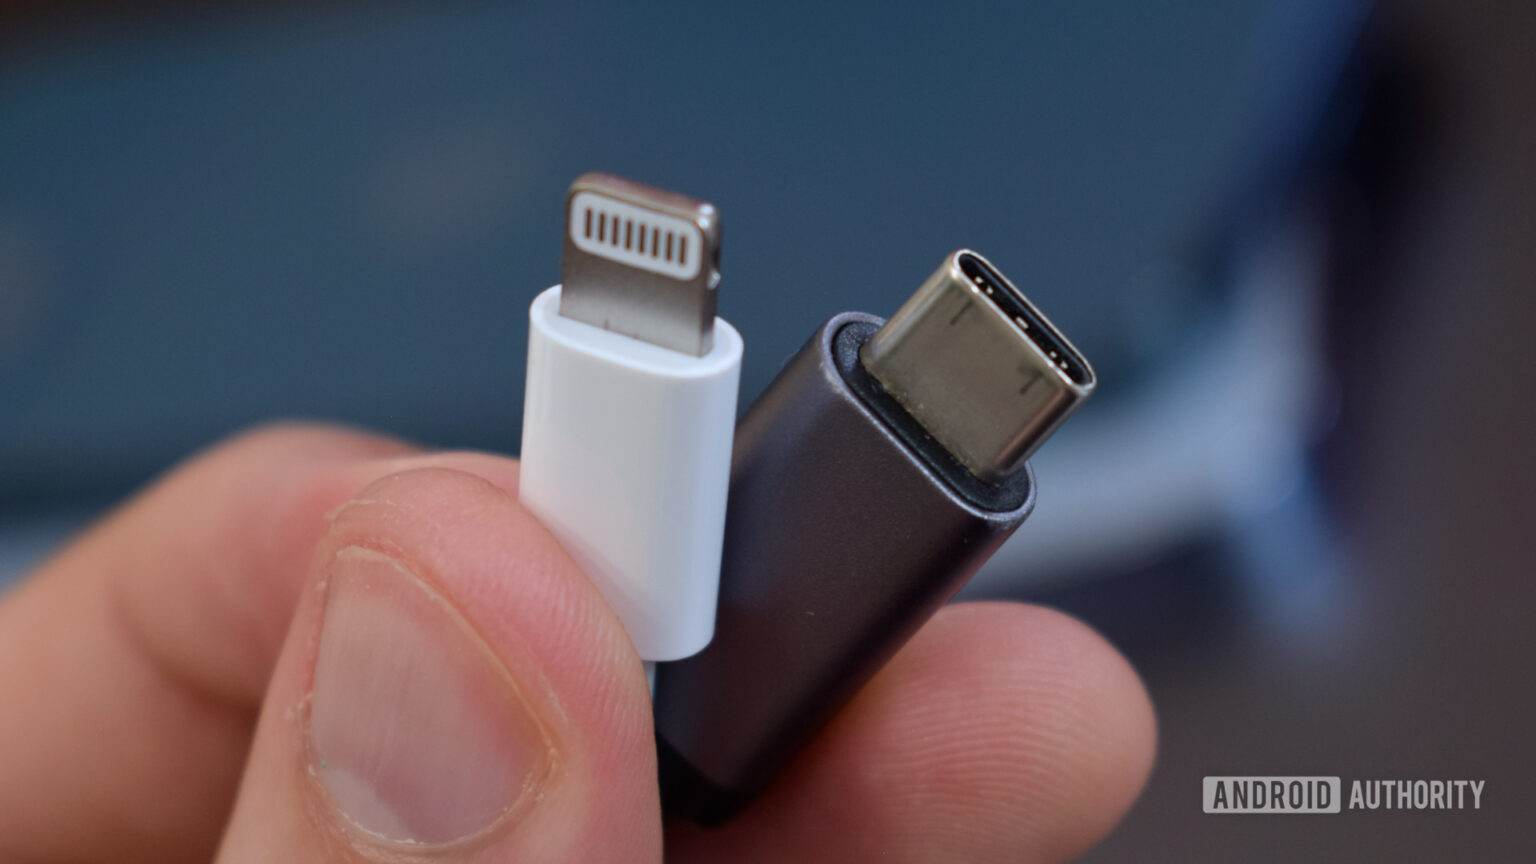 Lightning vs USB-C: Why Apple's fight over ports is a losing battle